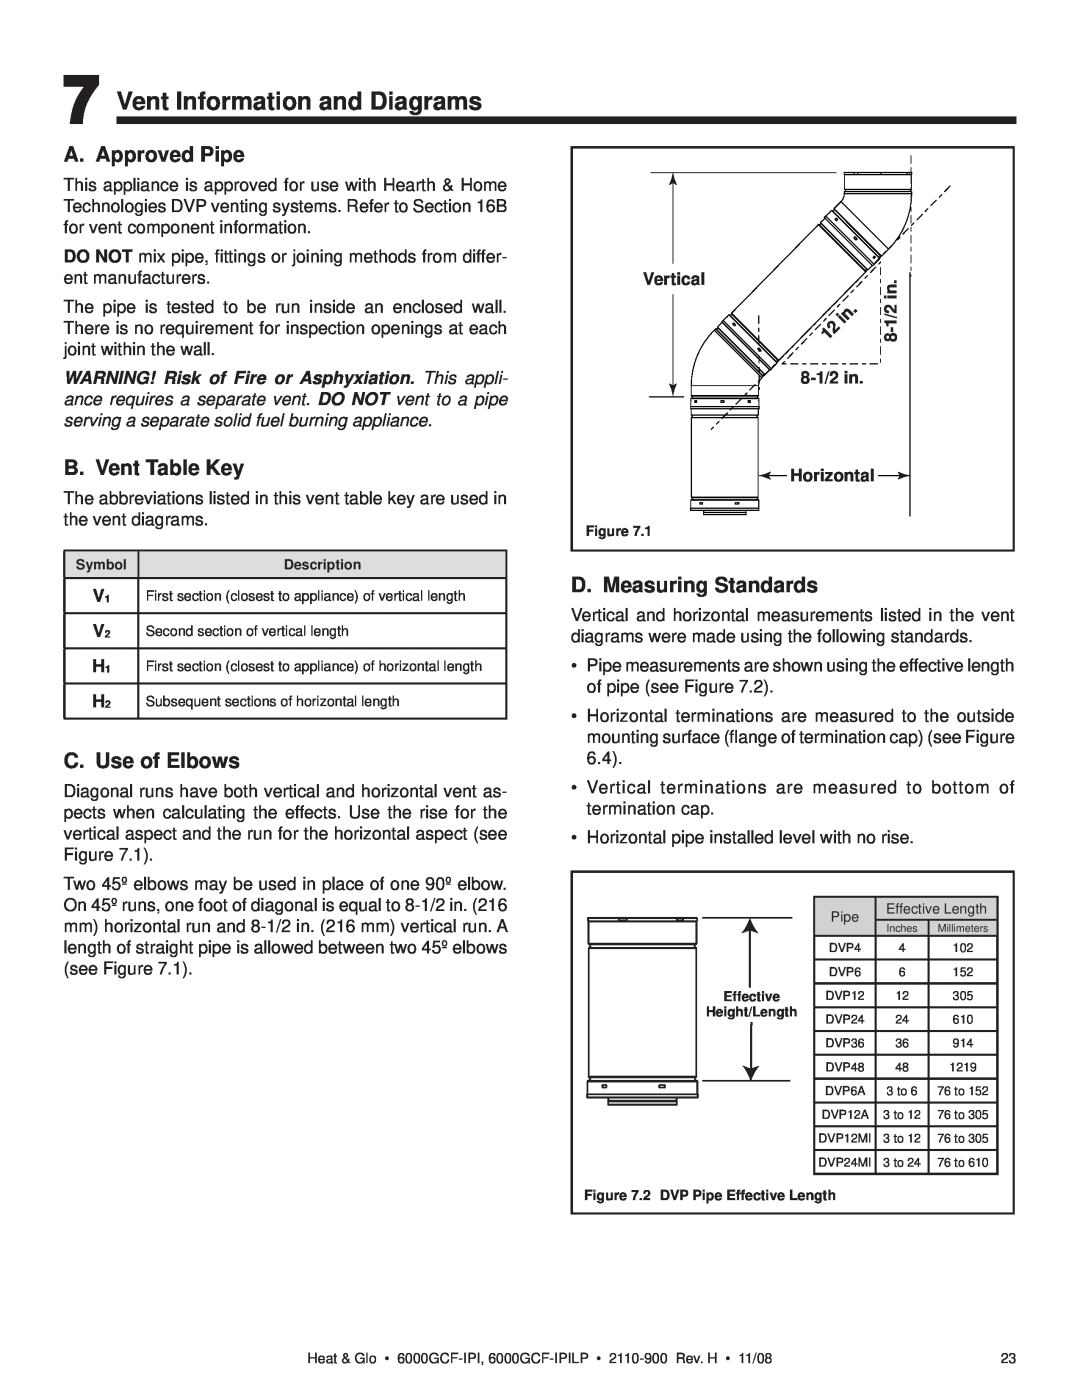 Hearth and Home Technologies 6000GCF-IPIL Vent Information and Diagrams, A. Approved Pipe, B. Vent Table Key 